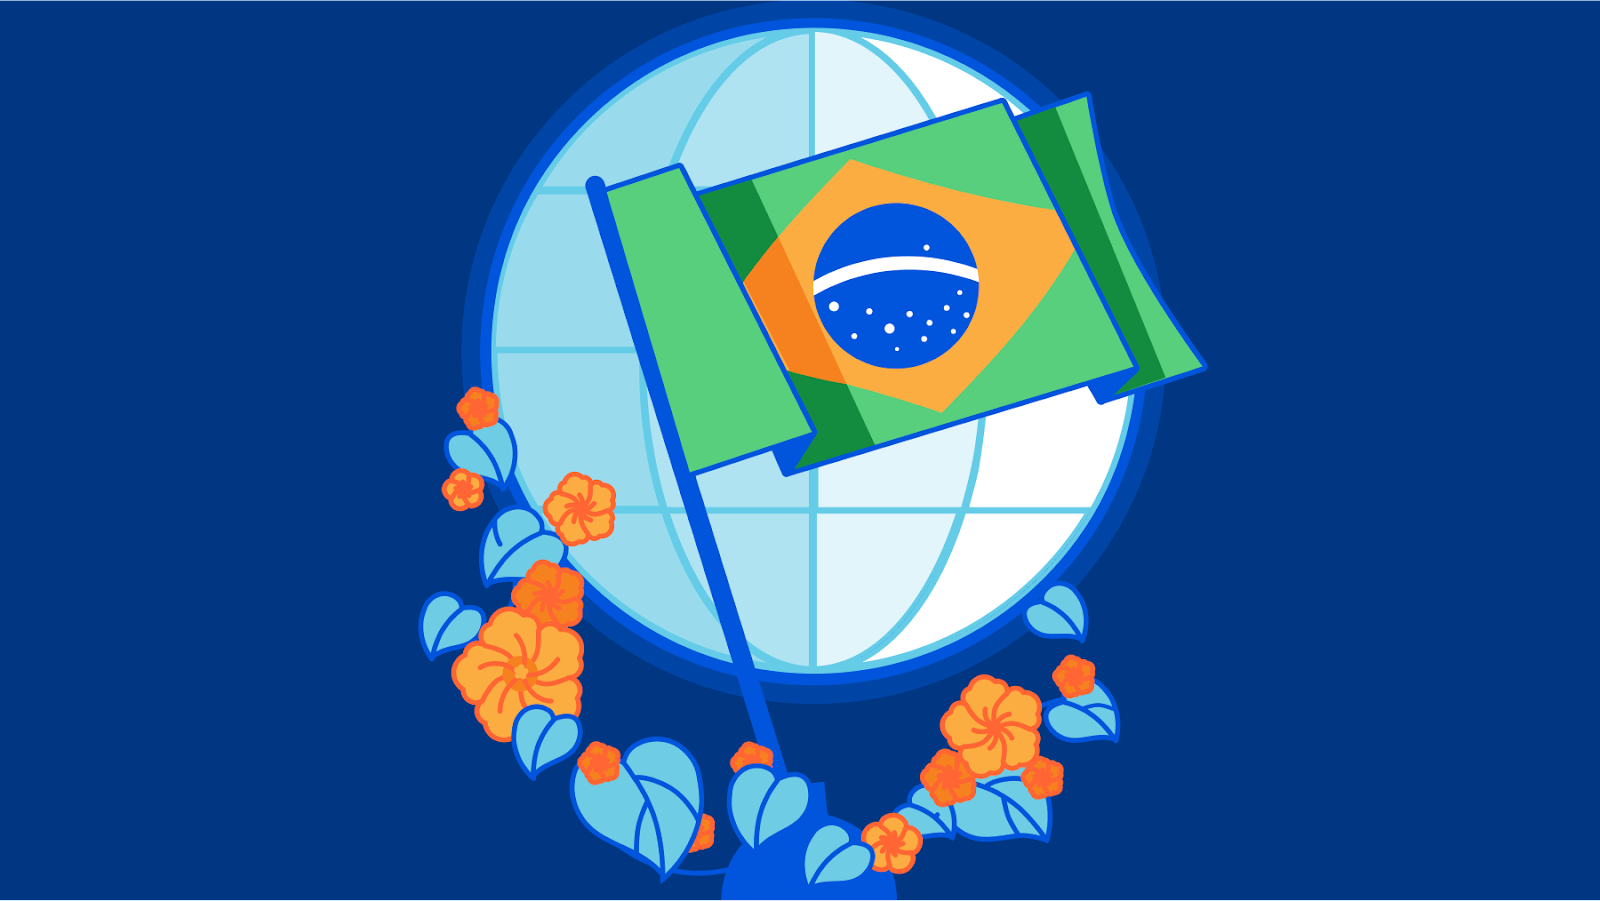 How the Brazilian Presidential elections affected Internet traffic